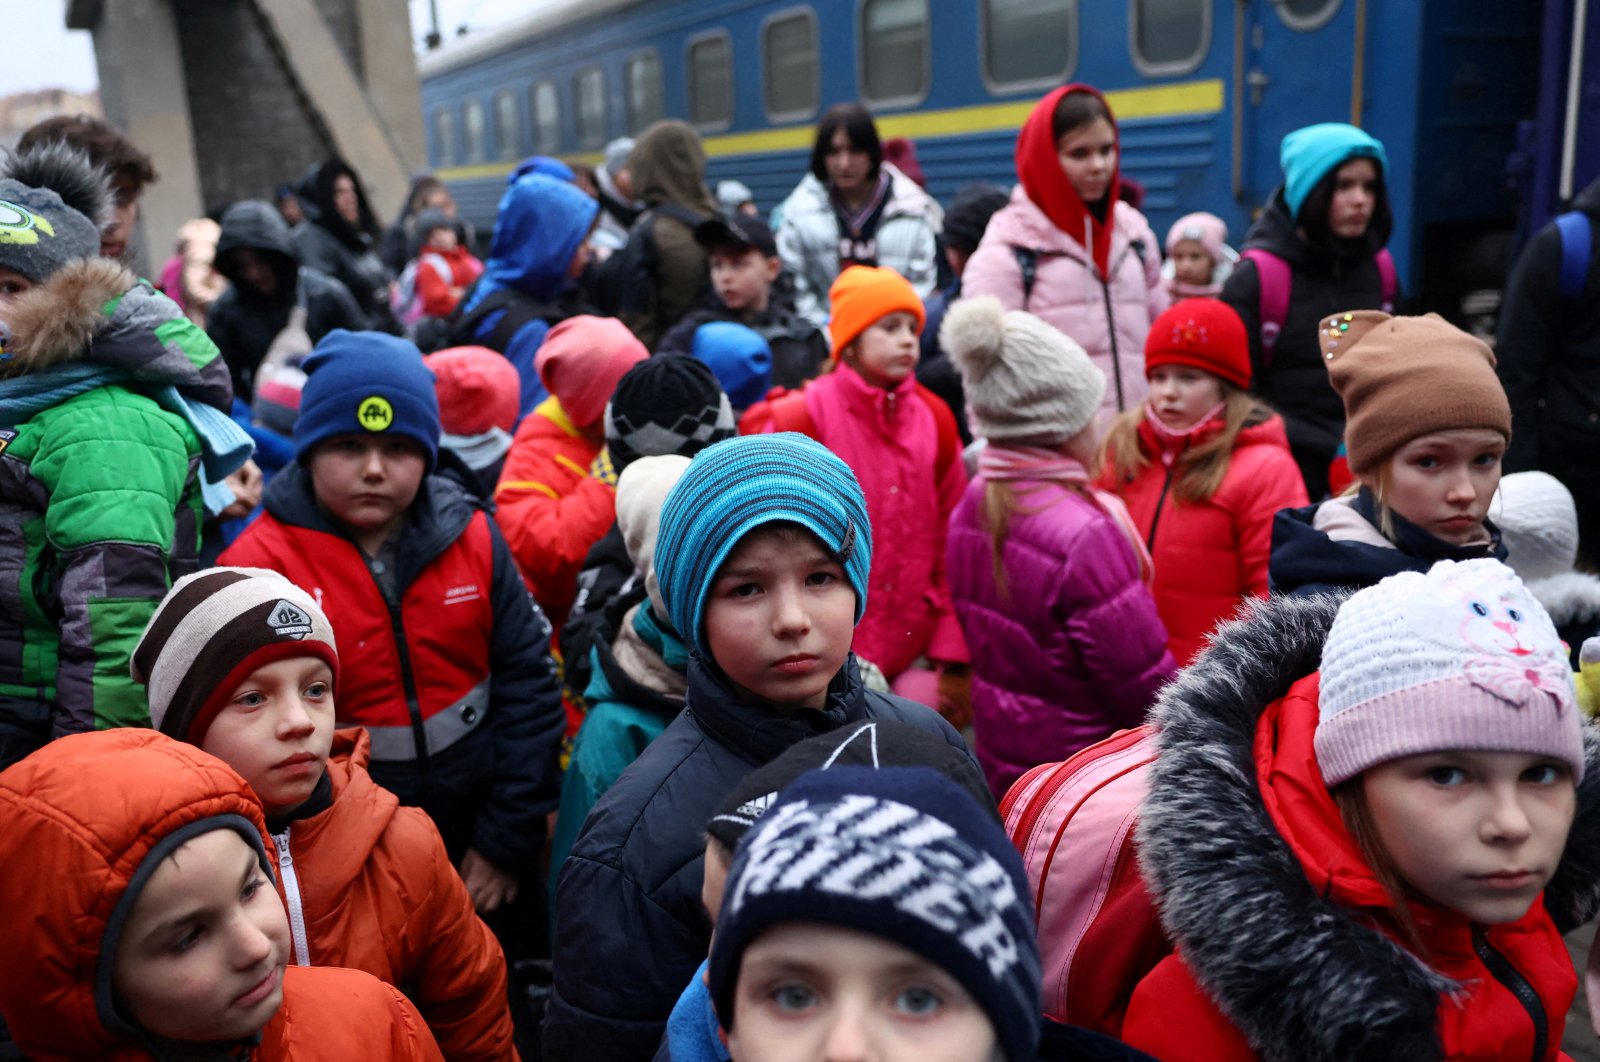 A group of children evacuated from an orphanage in Zaporizhzhia wait to board a bus for their transfer to Poland after fleeing the ongoing Russian invasion at the main train station in Lviv, Ukraine, March 5, 2022. (Reuters Photo)